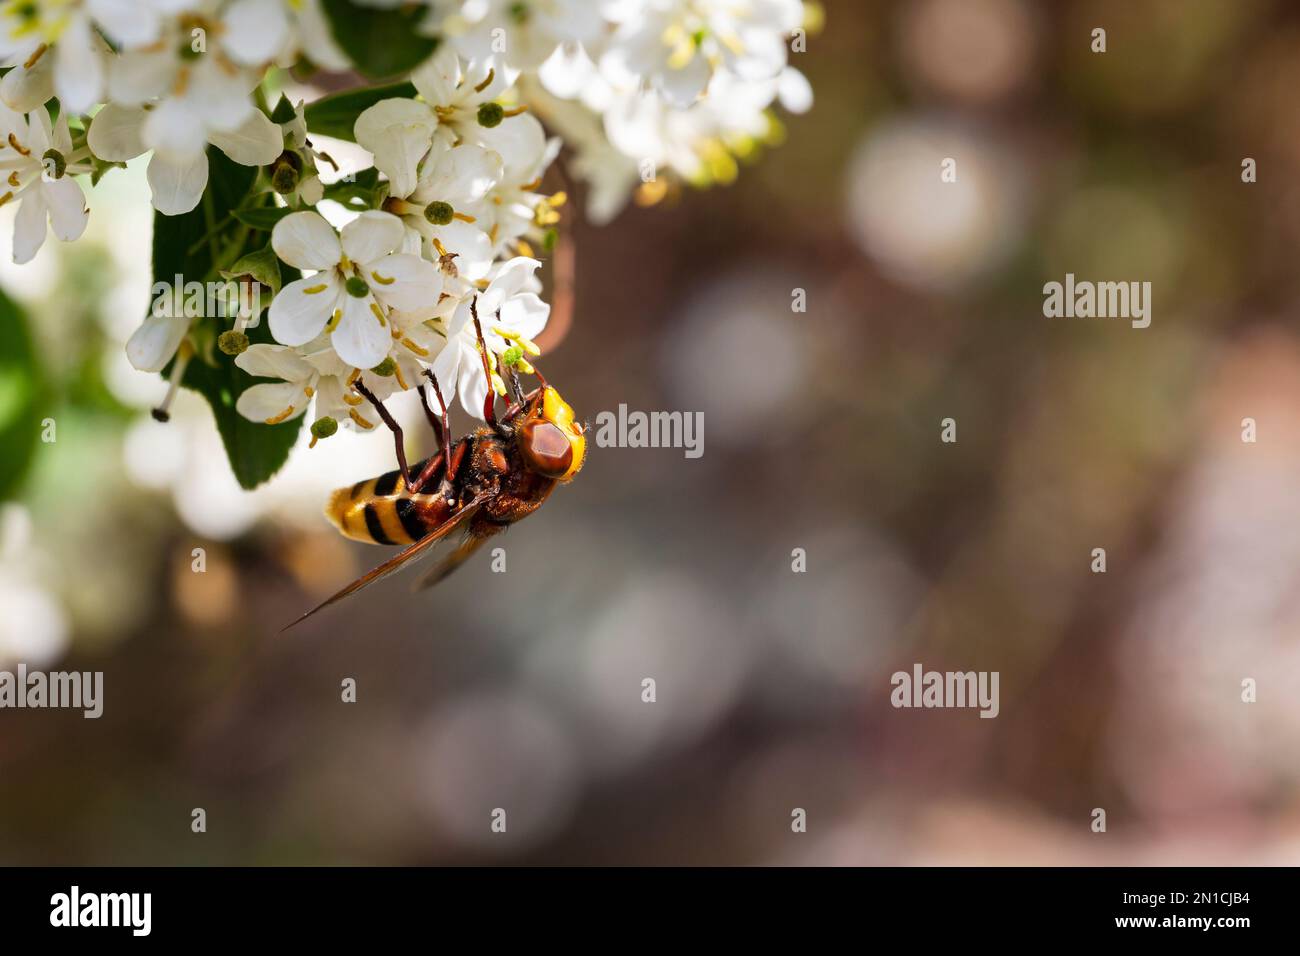 Hornet mimic hoverfly (Volucella zonaria) feeding on the nectar of white flowers Stock Photo